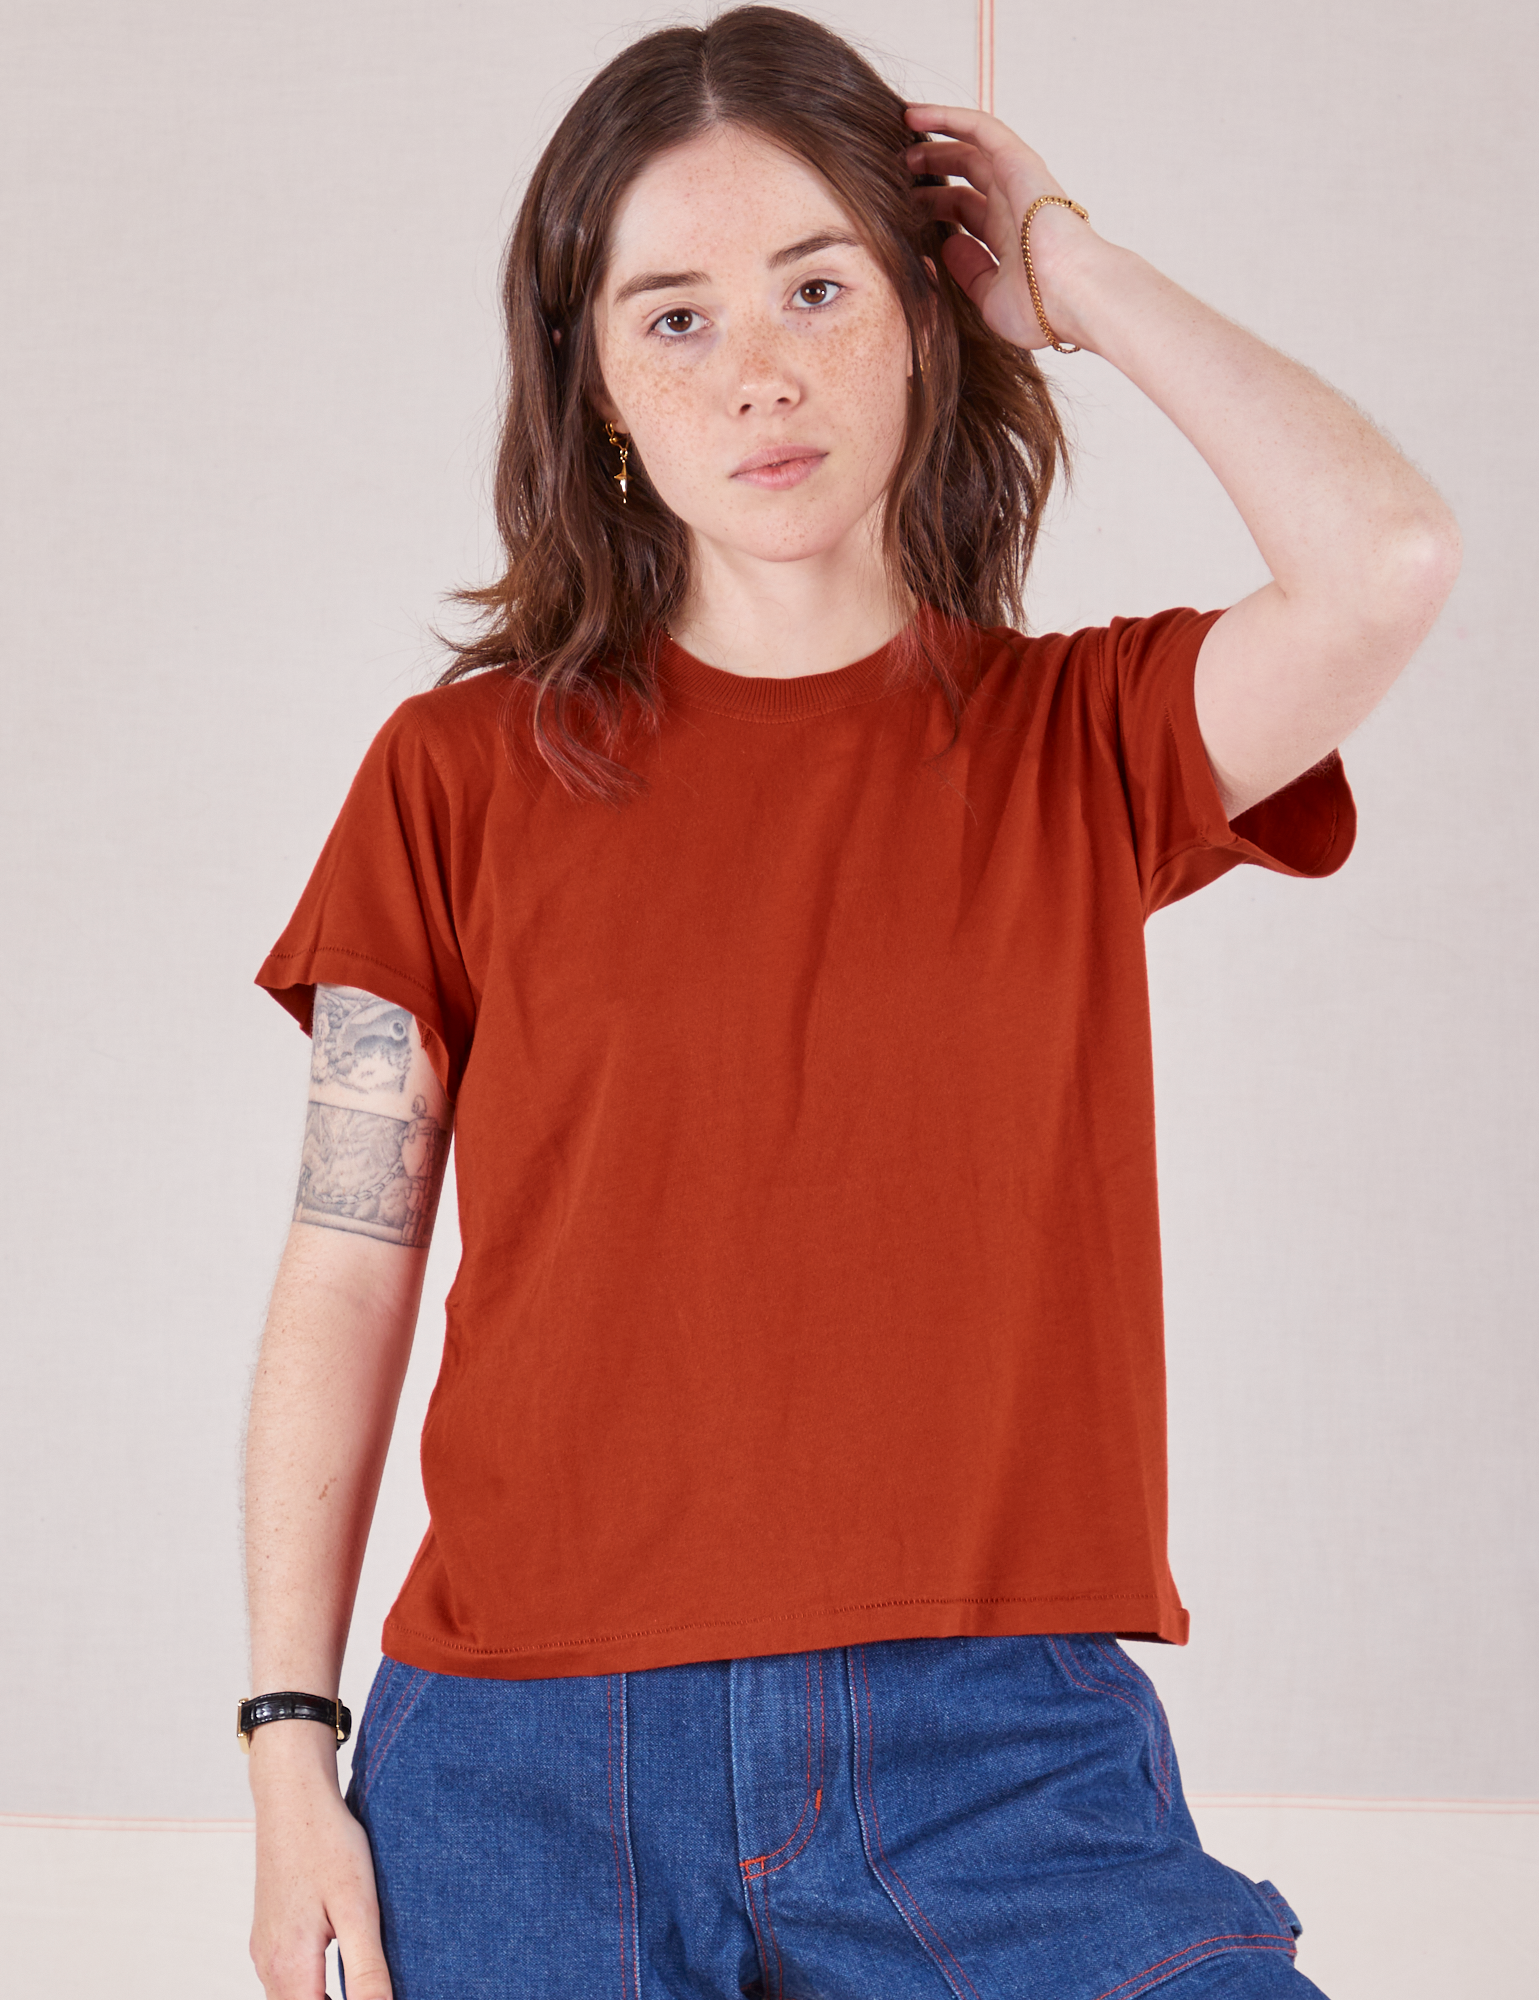 Hana is 5&#39;3&quot; and wearing P Organic Vintage Tee in Paprika